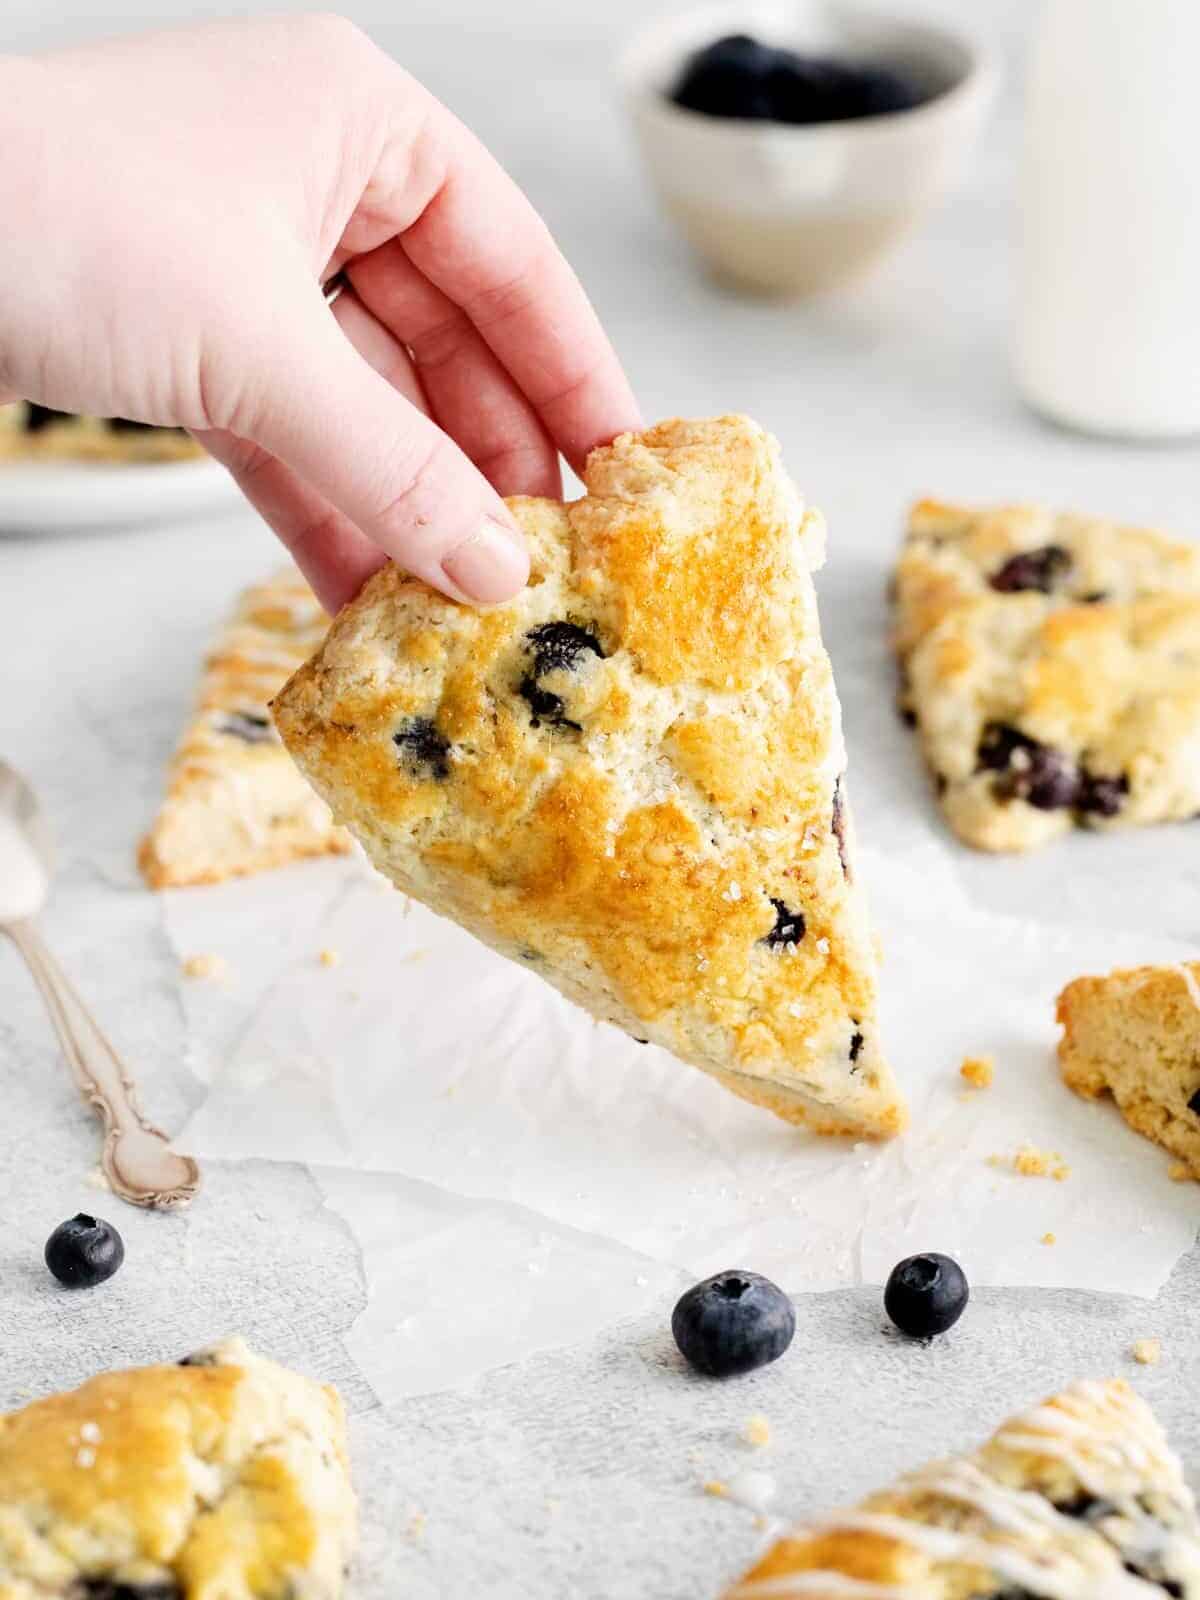 side view of a hand holding a blueberry scone with the tip resting on the table.